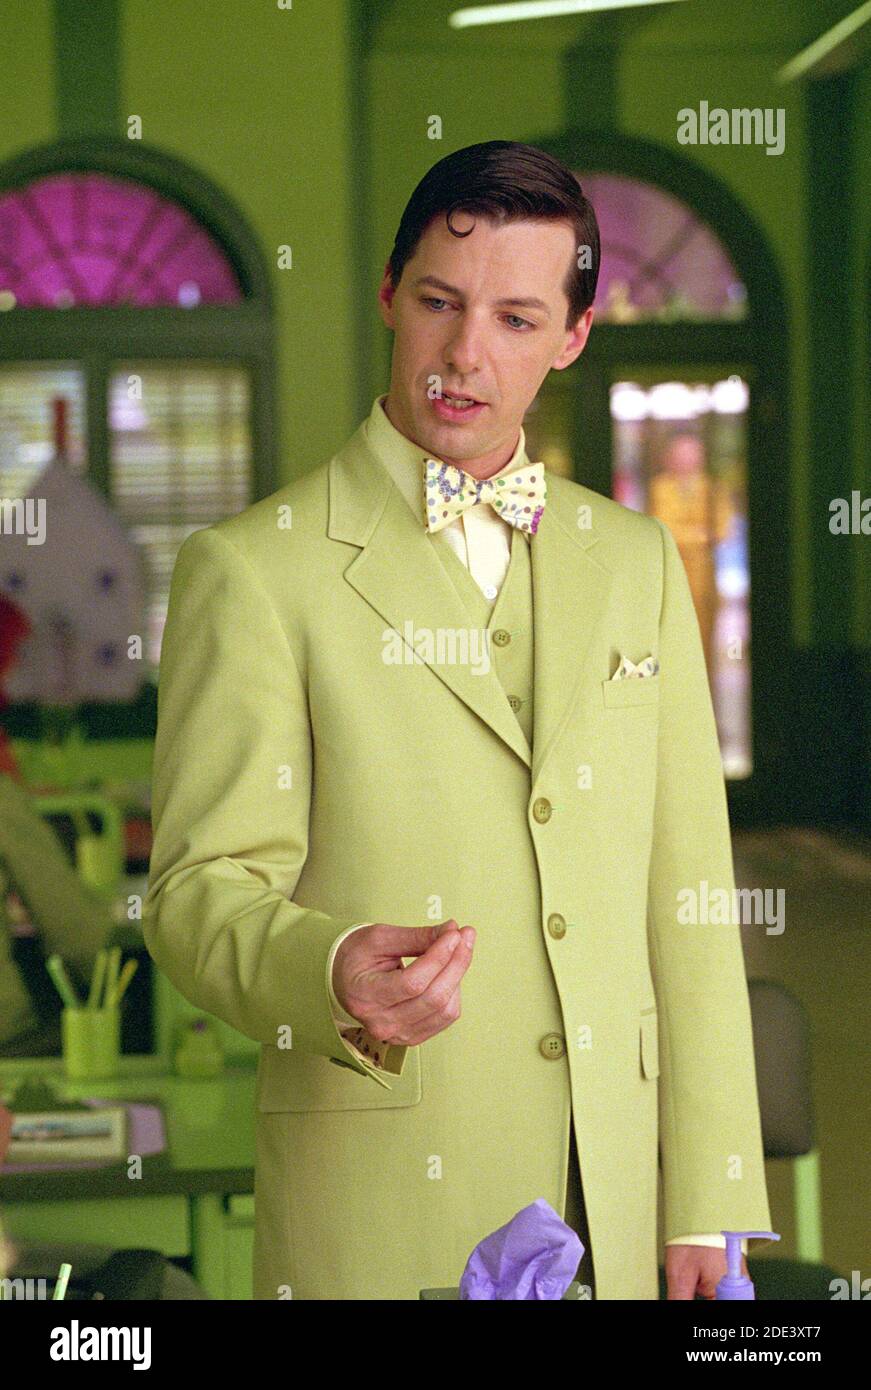 Sean Hayes, 'The Cat In The Hat' (2003)  Photo credit: Melinda Sue Gordon/Universal/The Hollywood Archive / File Reference # 34078-0519FSTHA Stock Photo